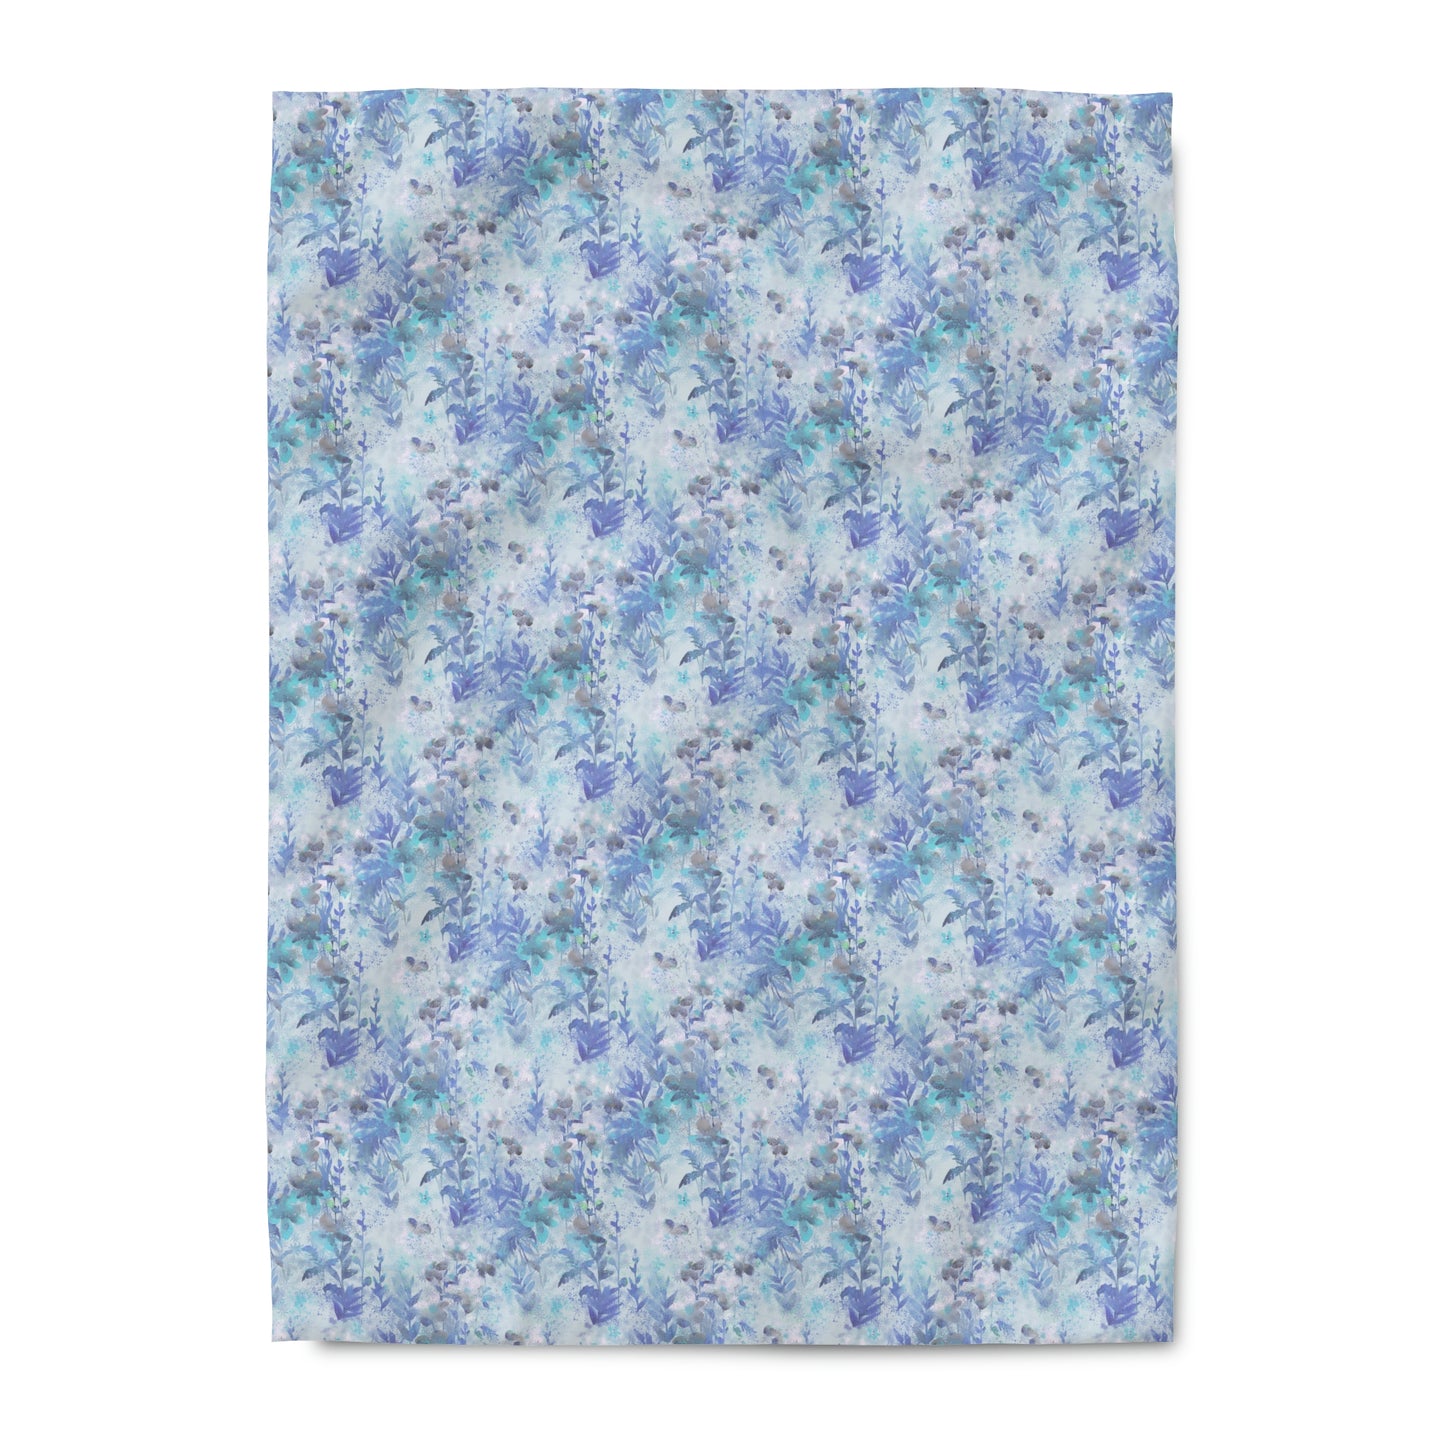 Watercolor Periwinkle Blue Duvet Cover lying on a bed, microfiber floral duvet cover bedroom accent